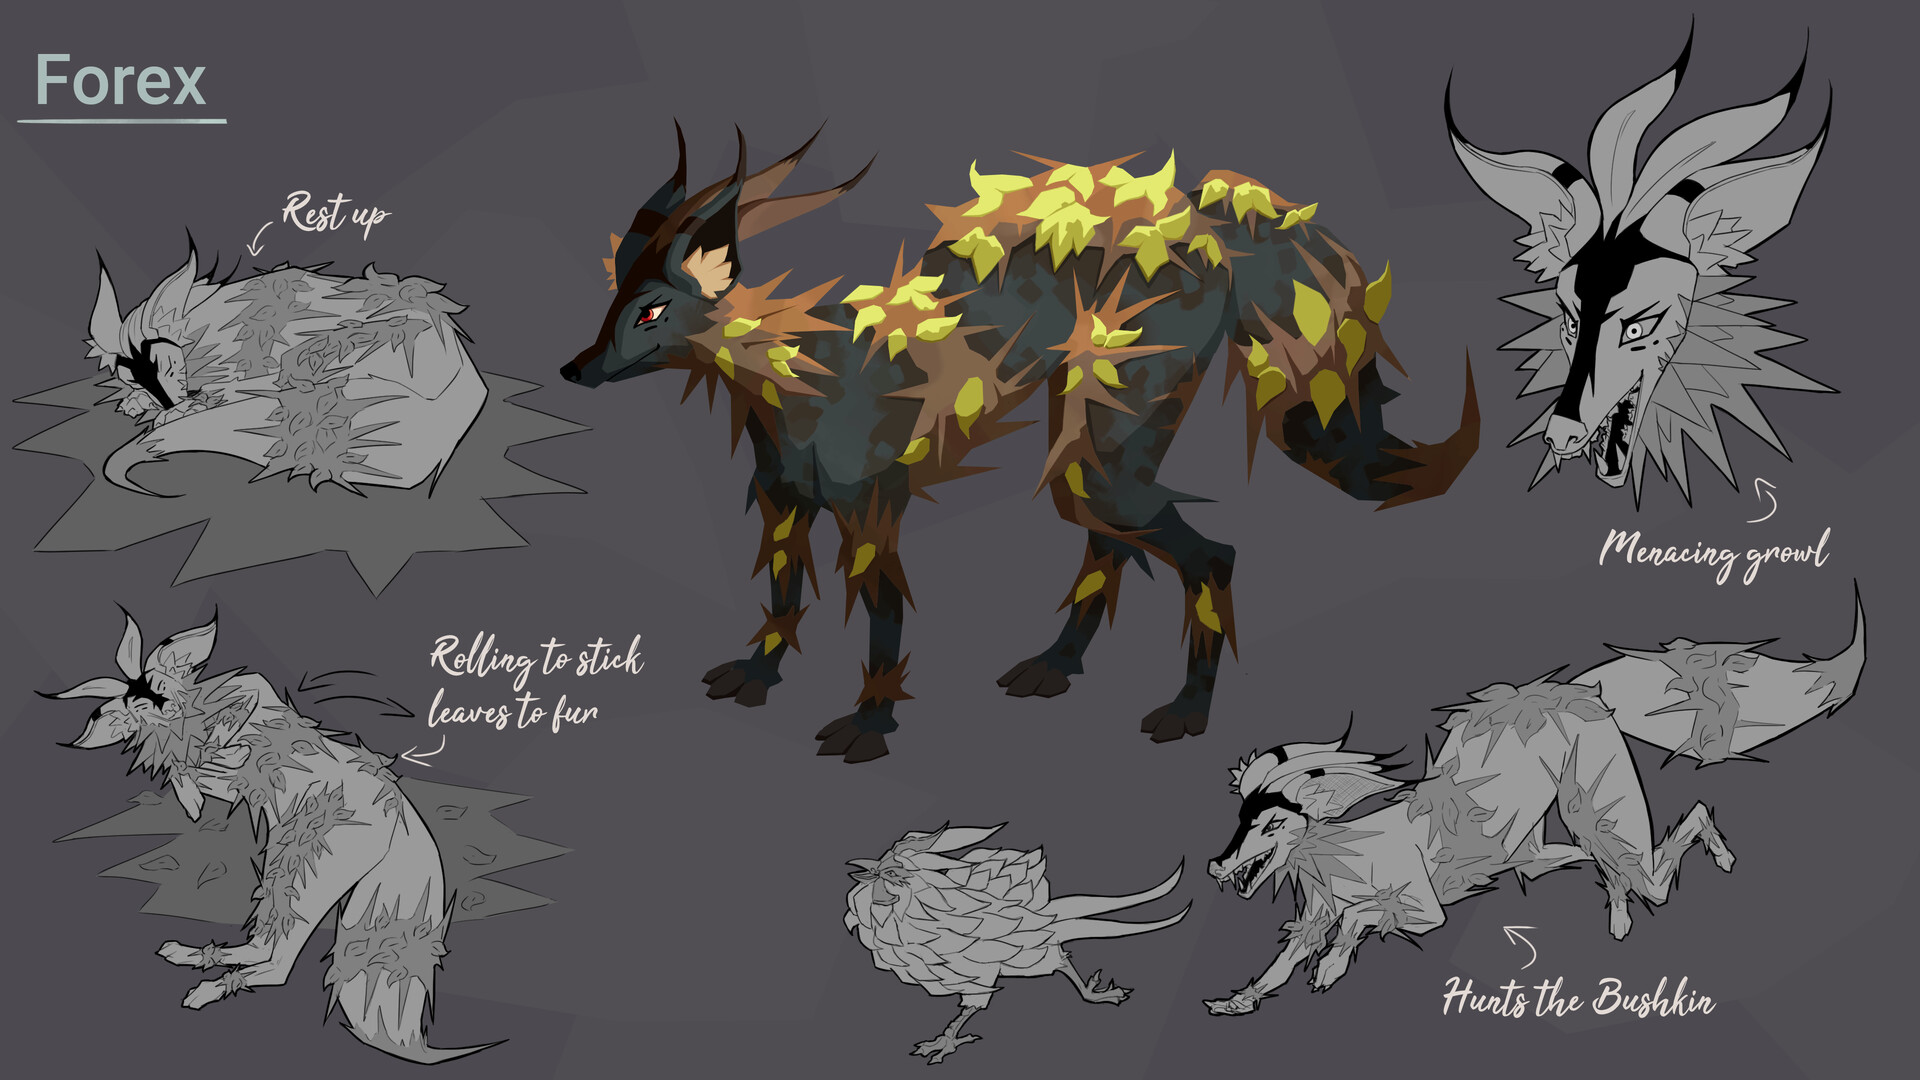 ArtStation - Creature Concept Sheets for Creatures of Sonaria by